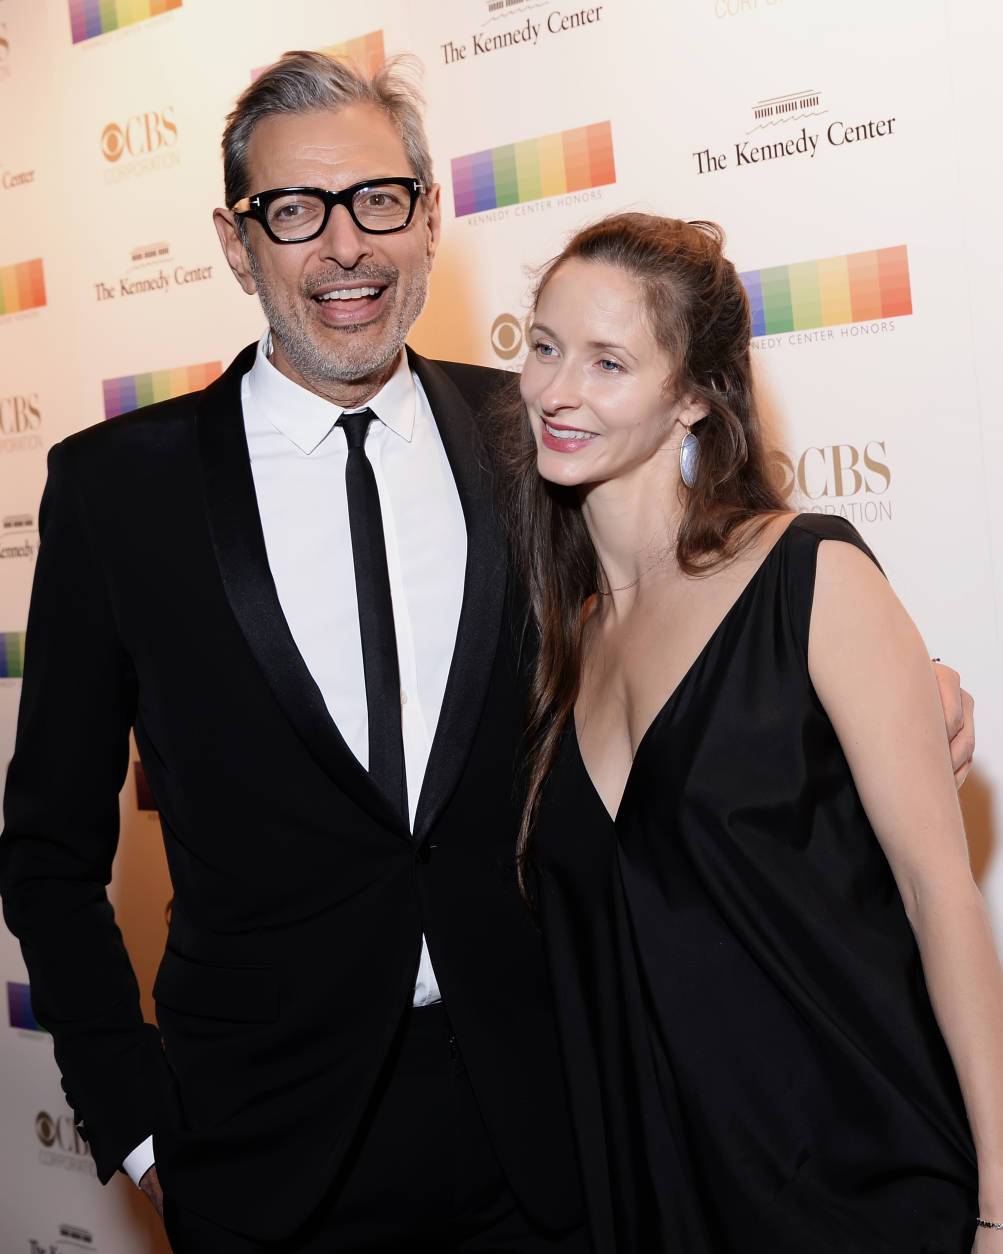 Actor Jeff Goldblum and his wife Emilie Livingston. (Courtesy Shannon Finney, <a href="http://www.shannonfinneyphotography.com">www.shannonfinneyphotography.com</a>)